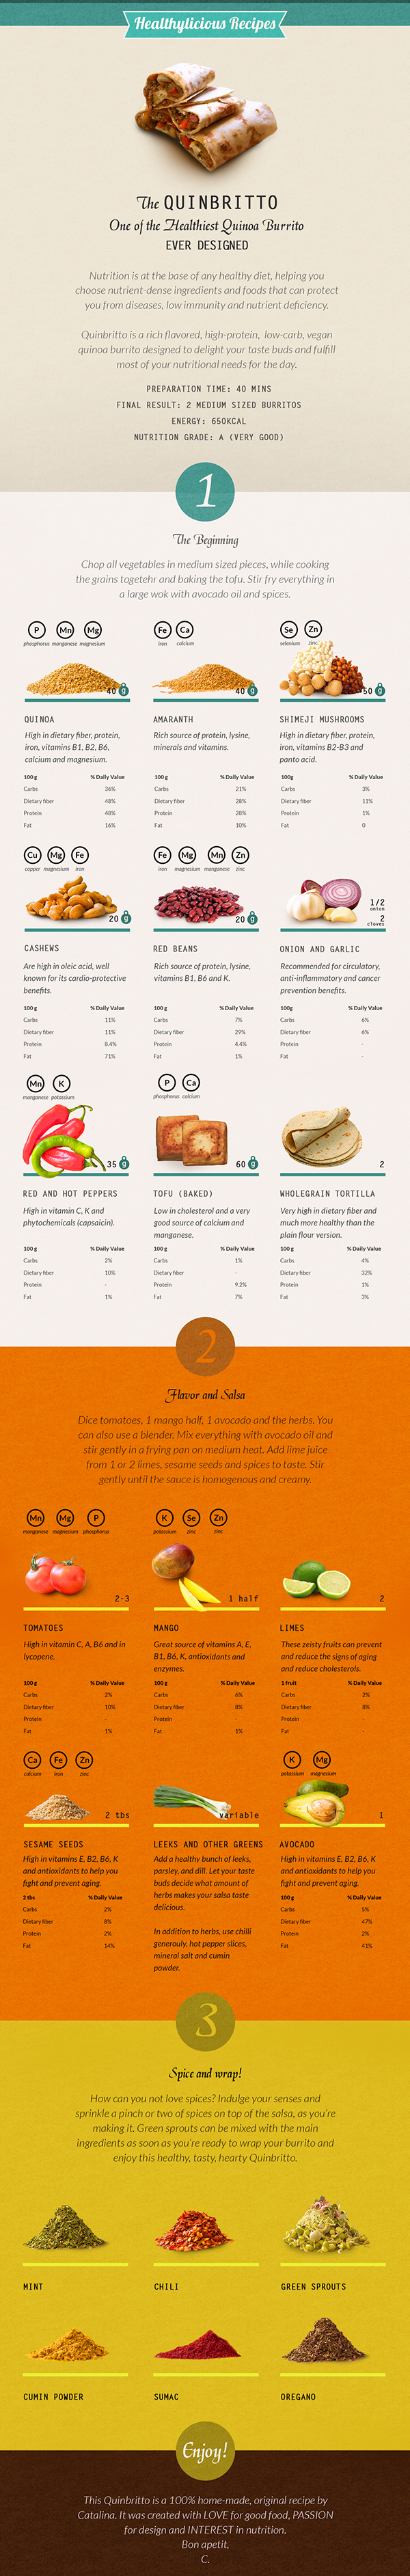 Food  recipe infographic poster Burrito nutrition Good Food ingredients